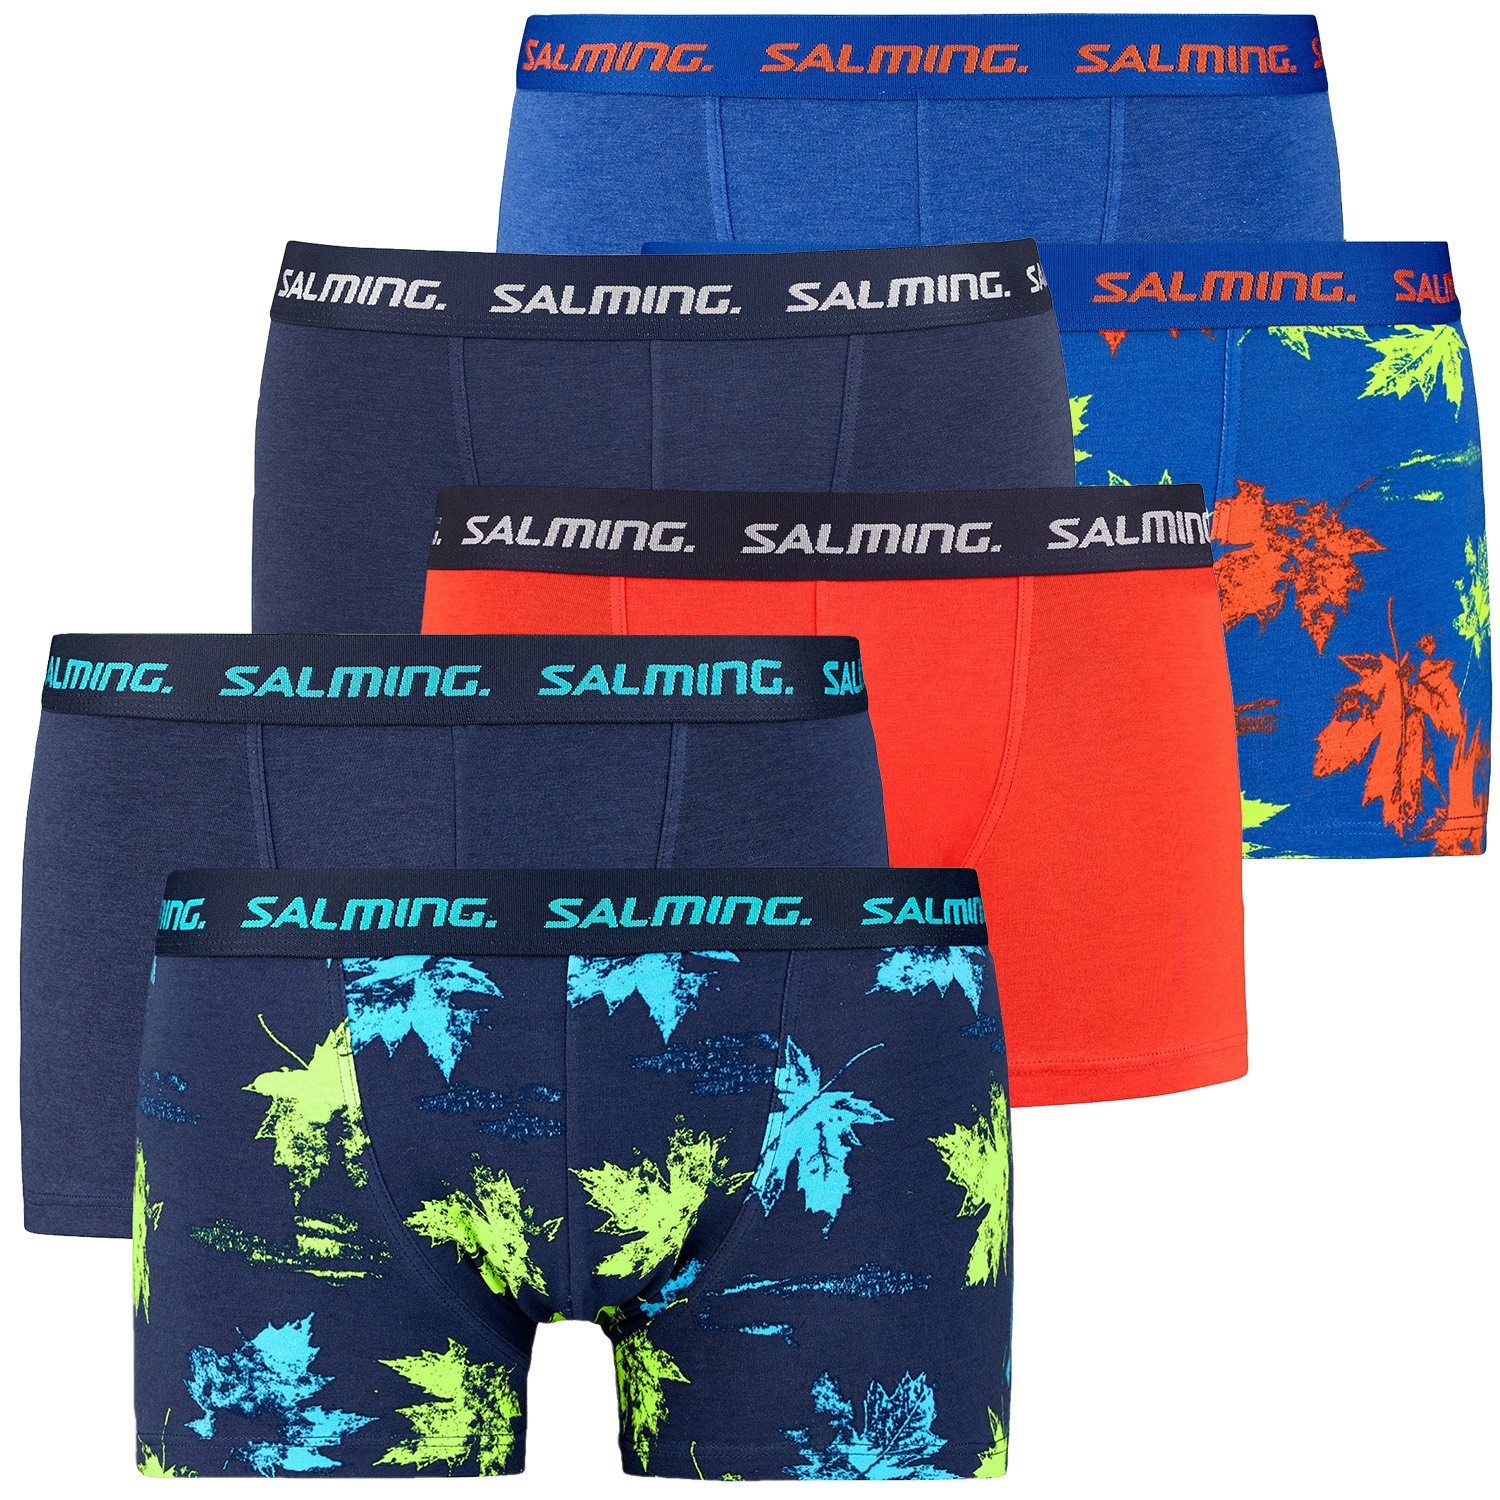 Salming Bamboo Boxers